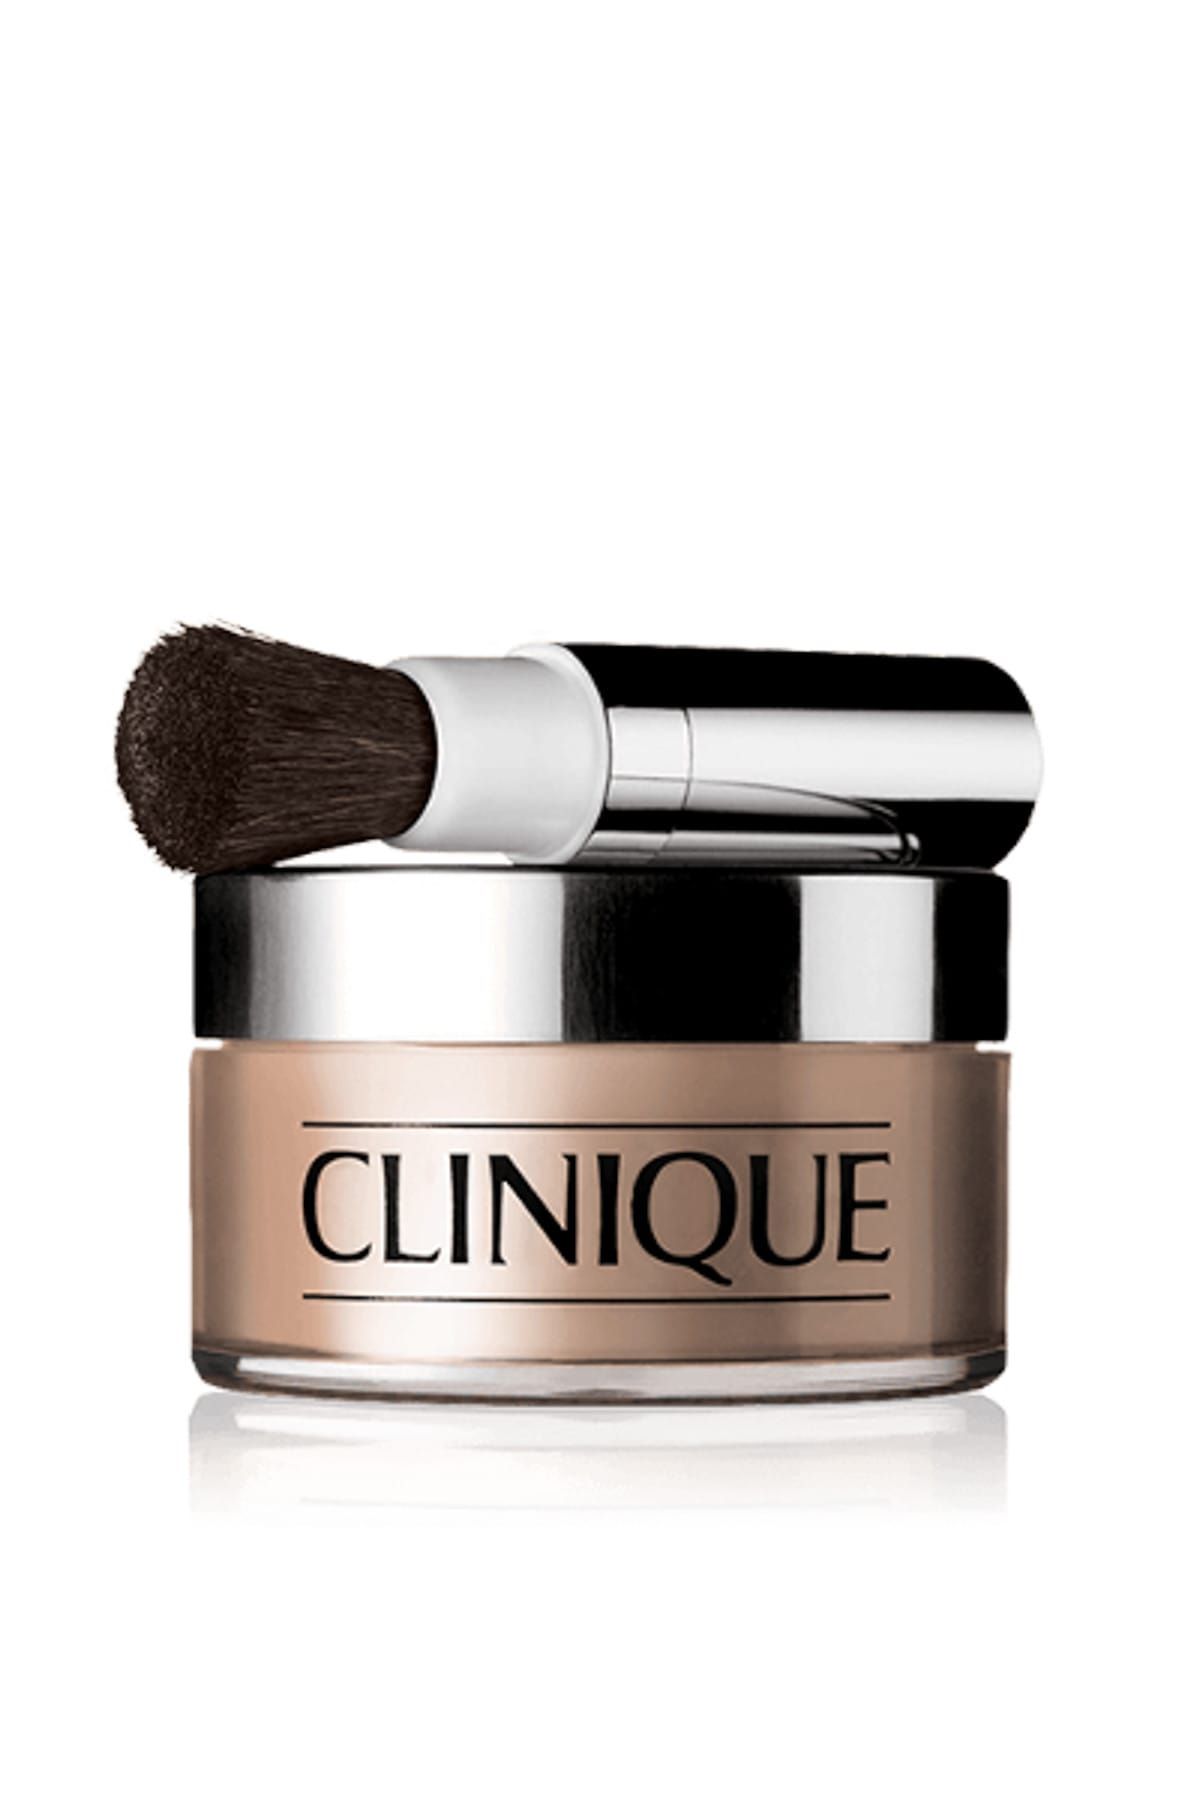 Clinique Pudra - Blended Face Powder Transparency 4 35 g 20714001247